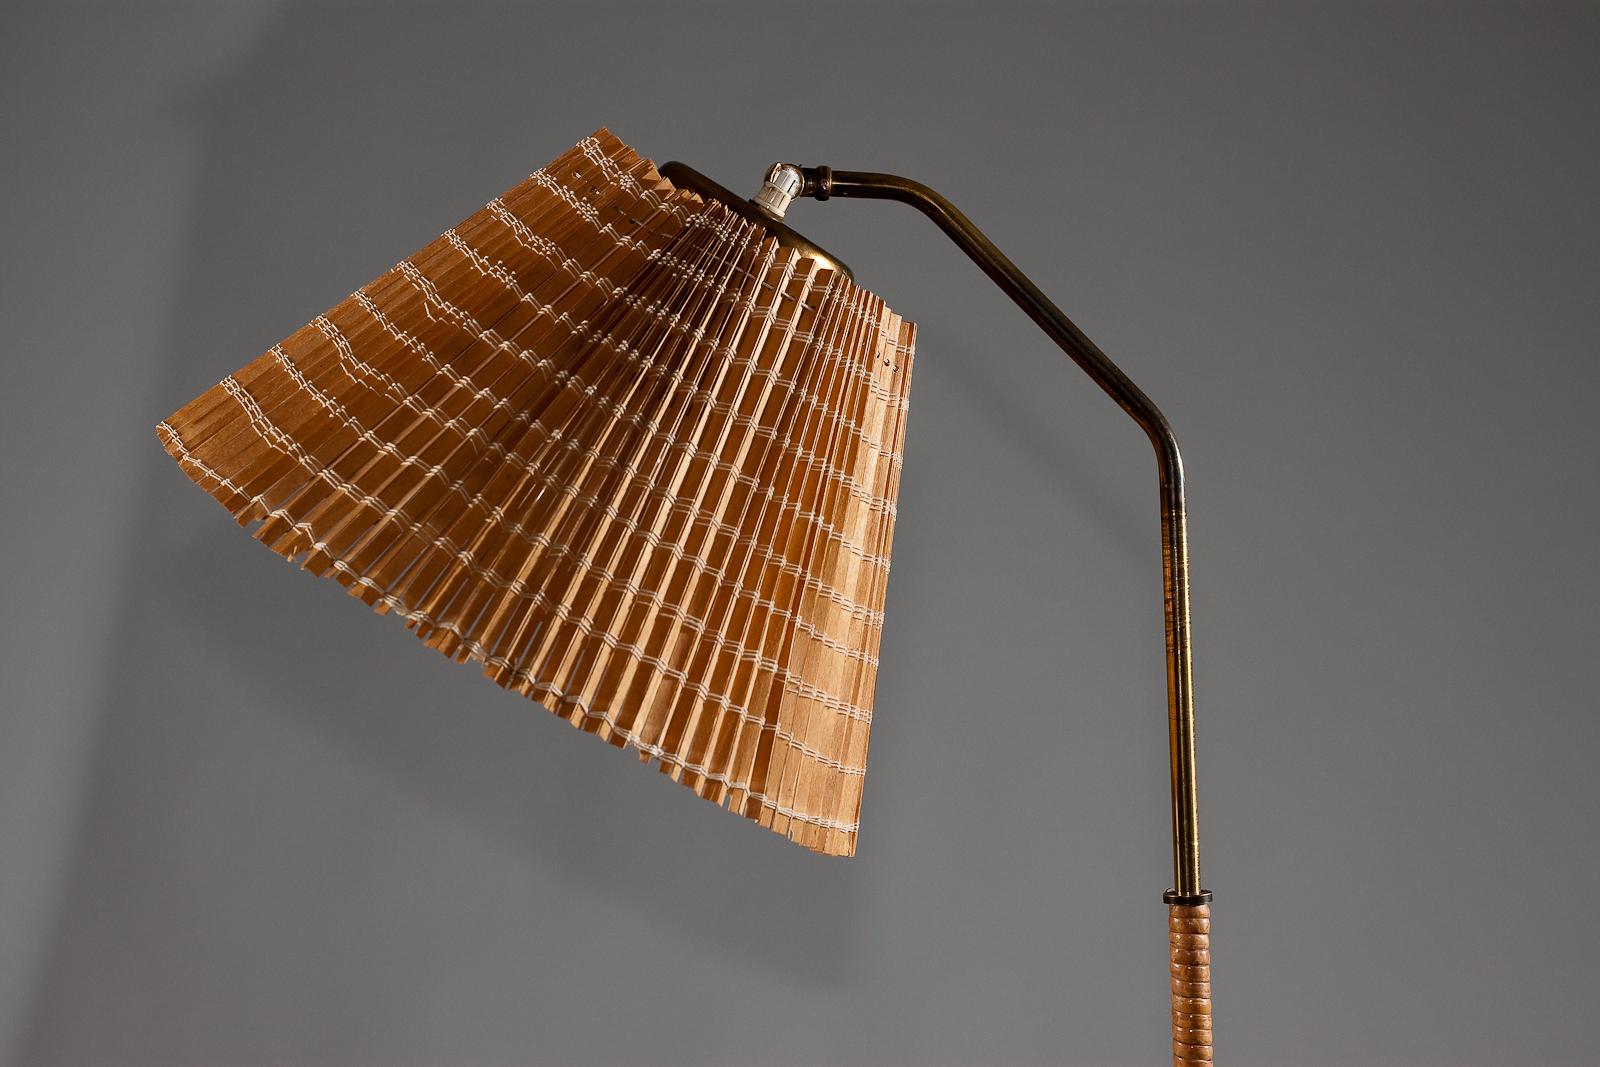 Rattan Finnish 1950's brass floor lamp with wrapped rattan stem and wooden slat shade